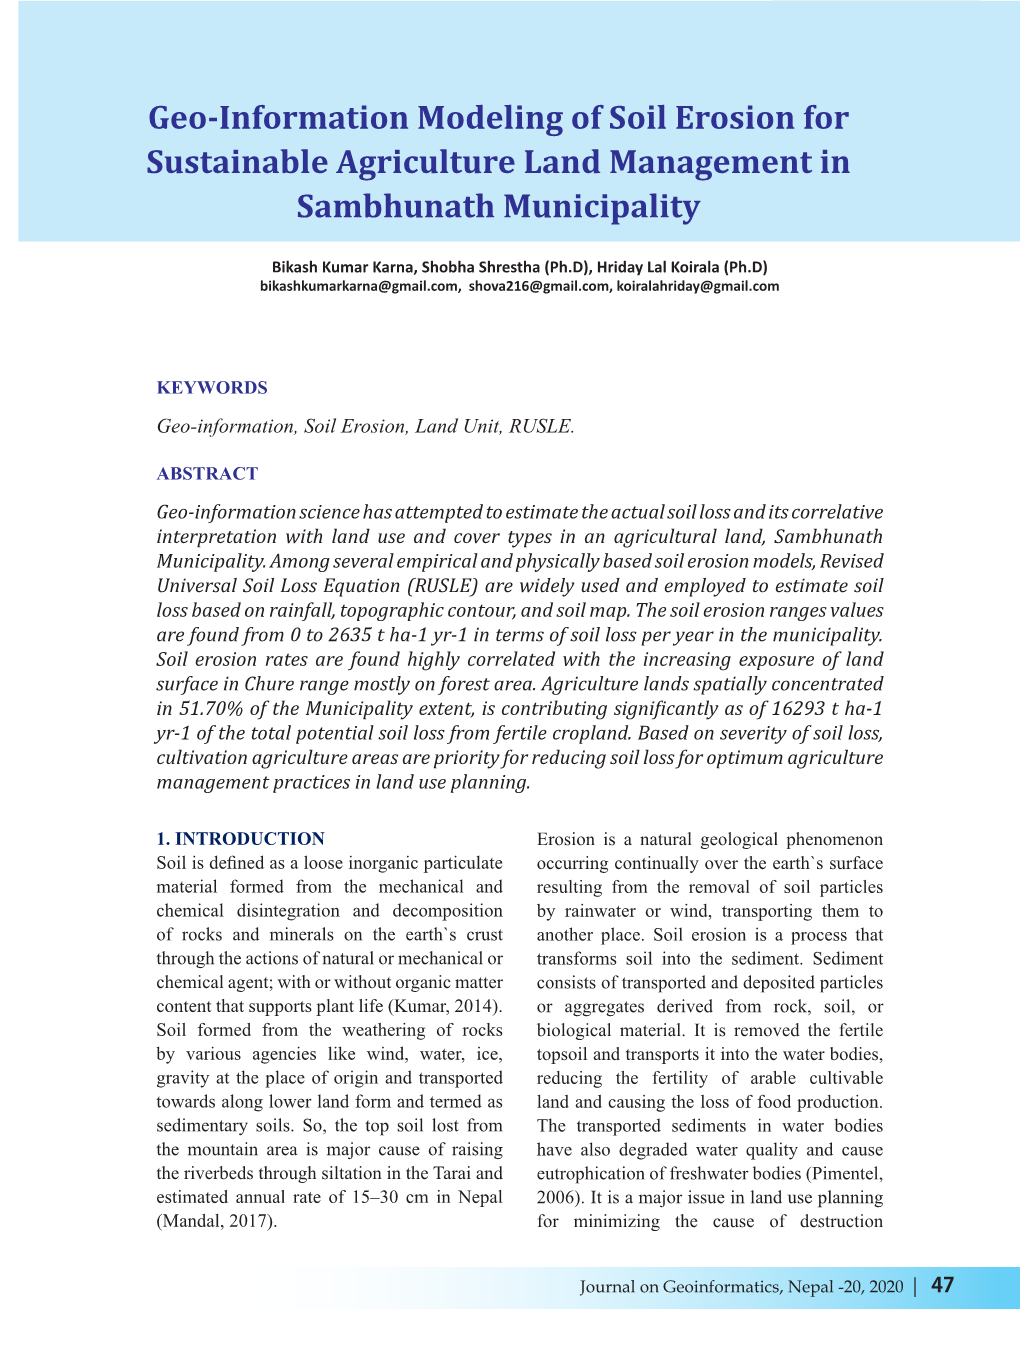 Geo-Information Modeling of Soil Erosion for Sustainable Agriculture Land Management in Sambhunath Municipality